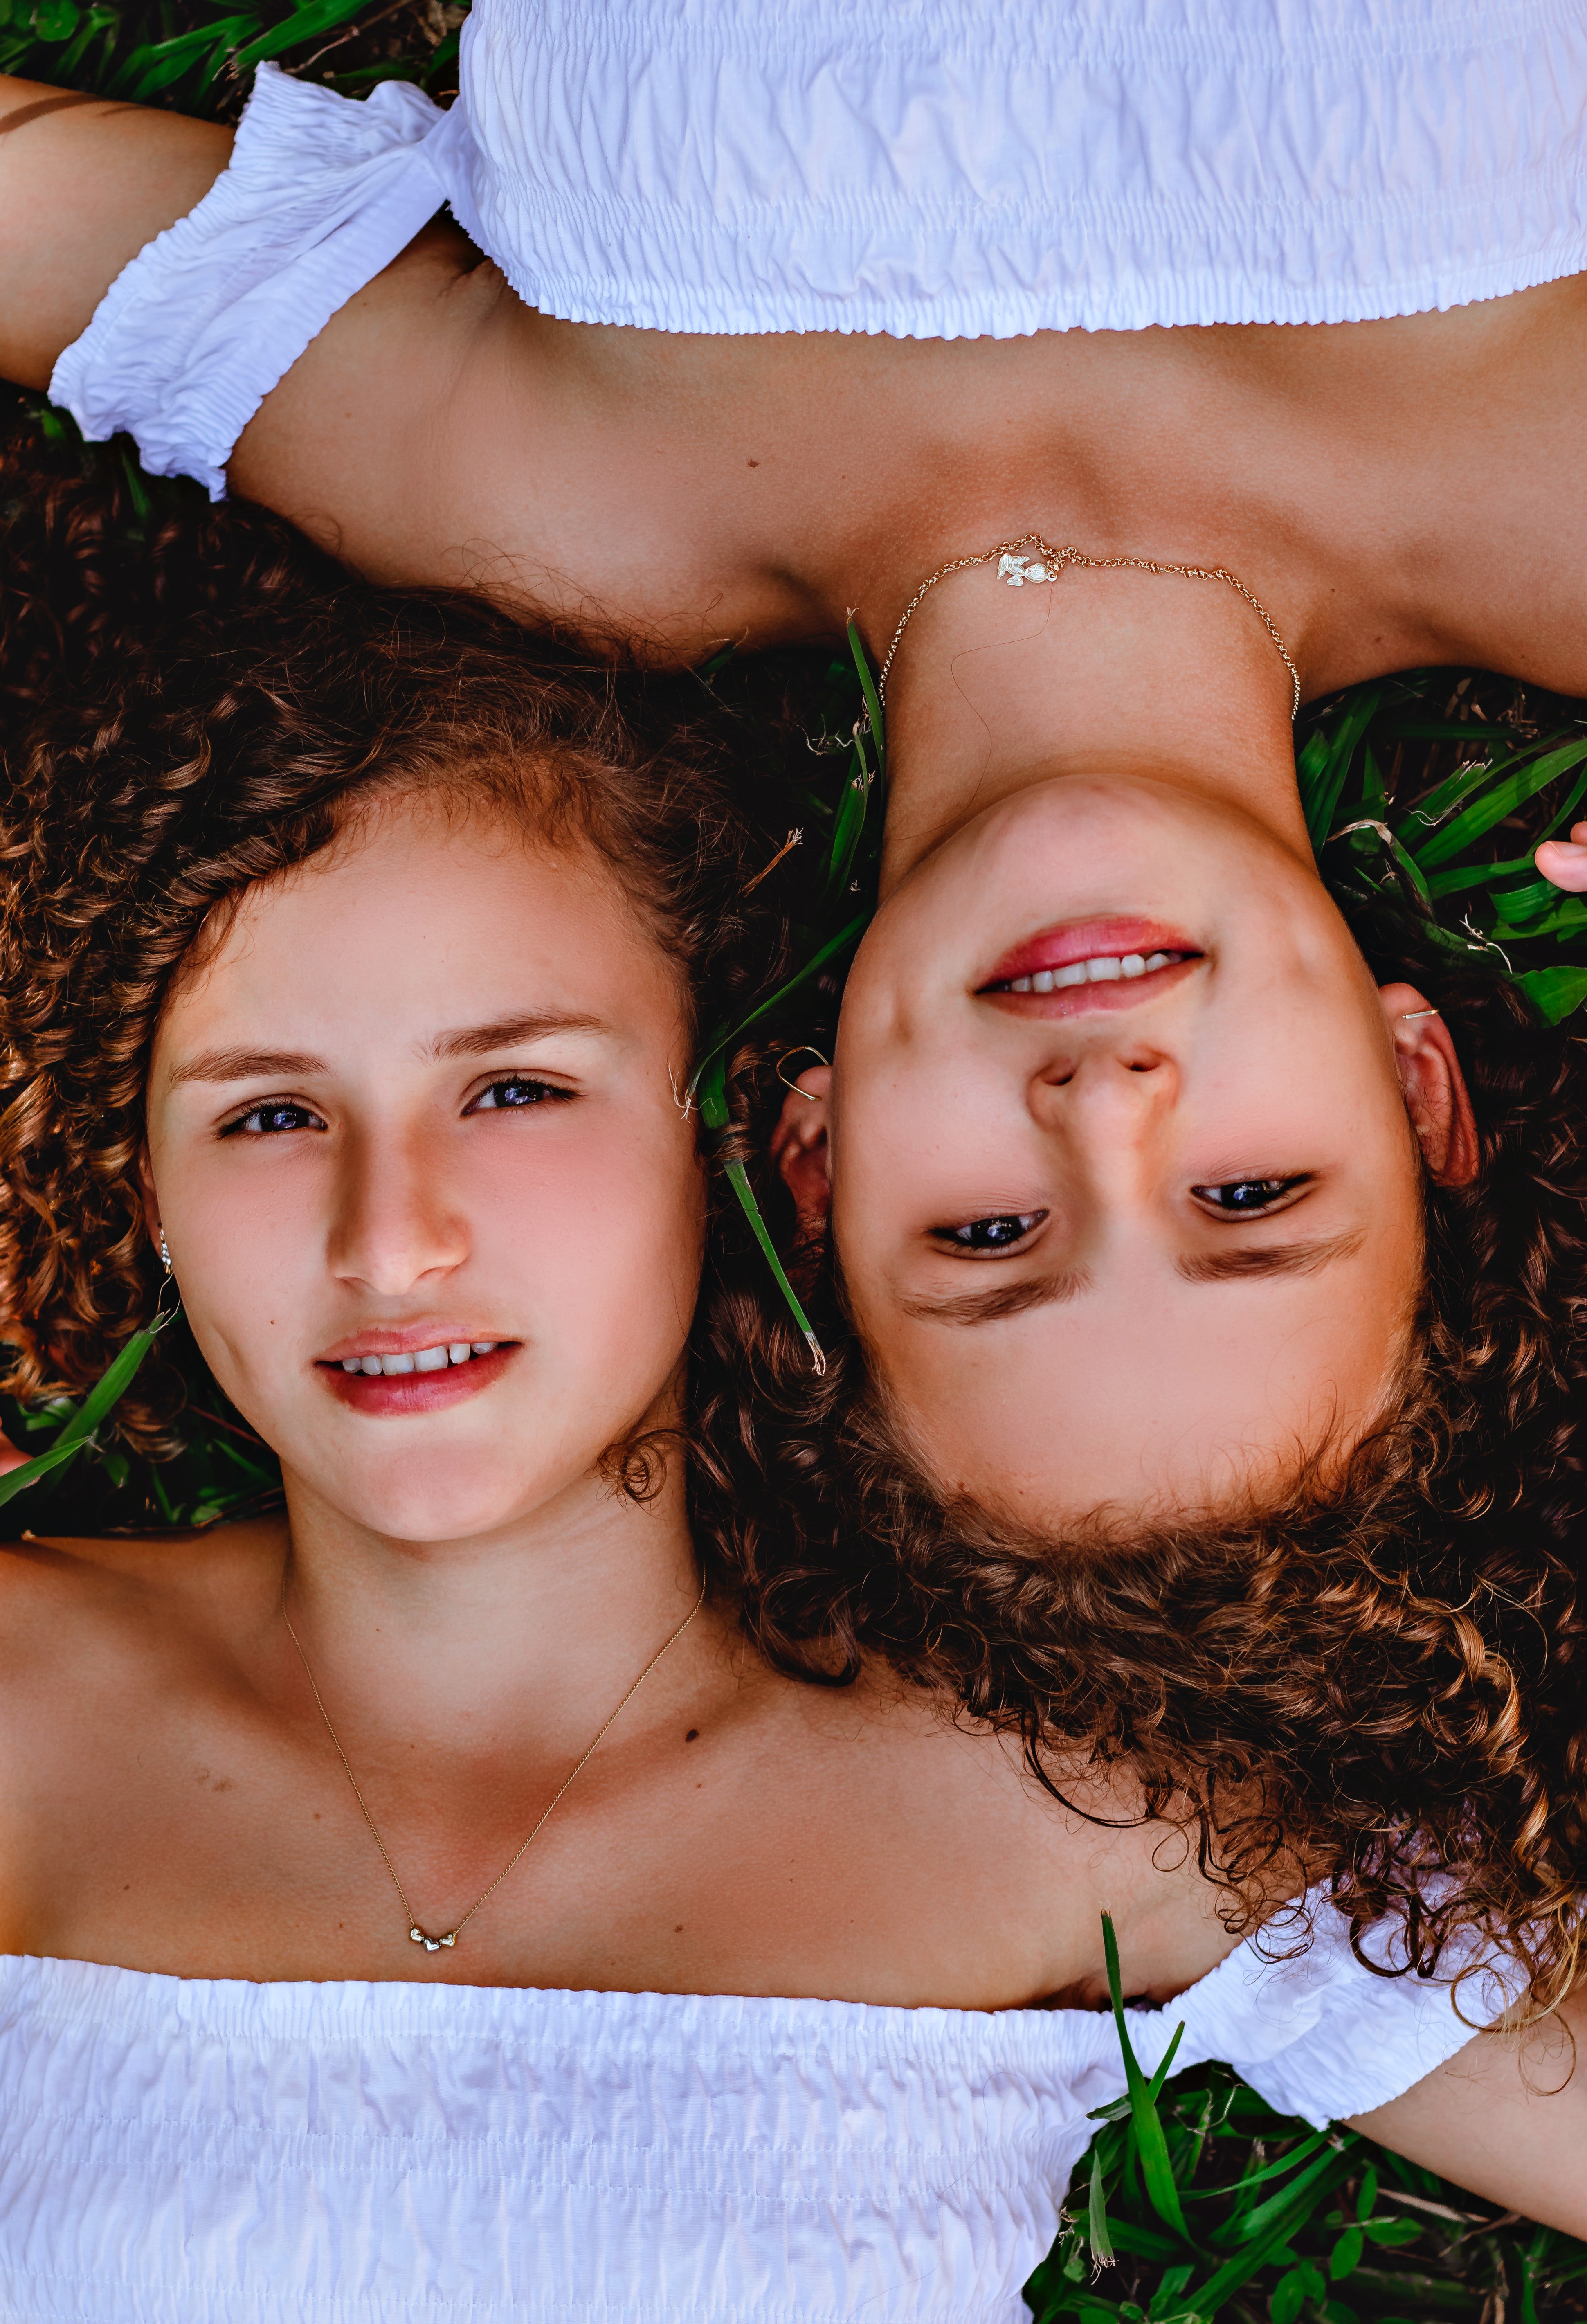 Kelly and Alice grew up as sisters. | Source: Unsplash